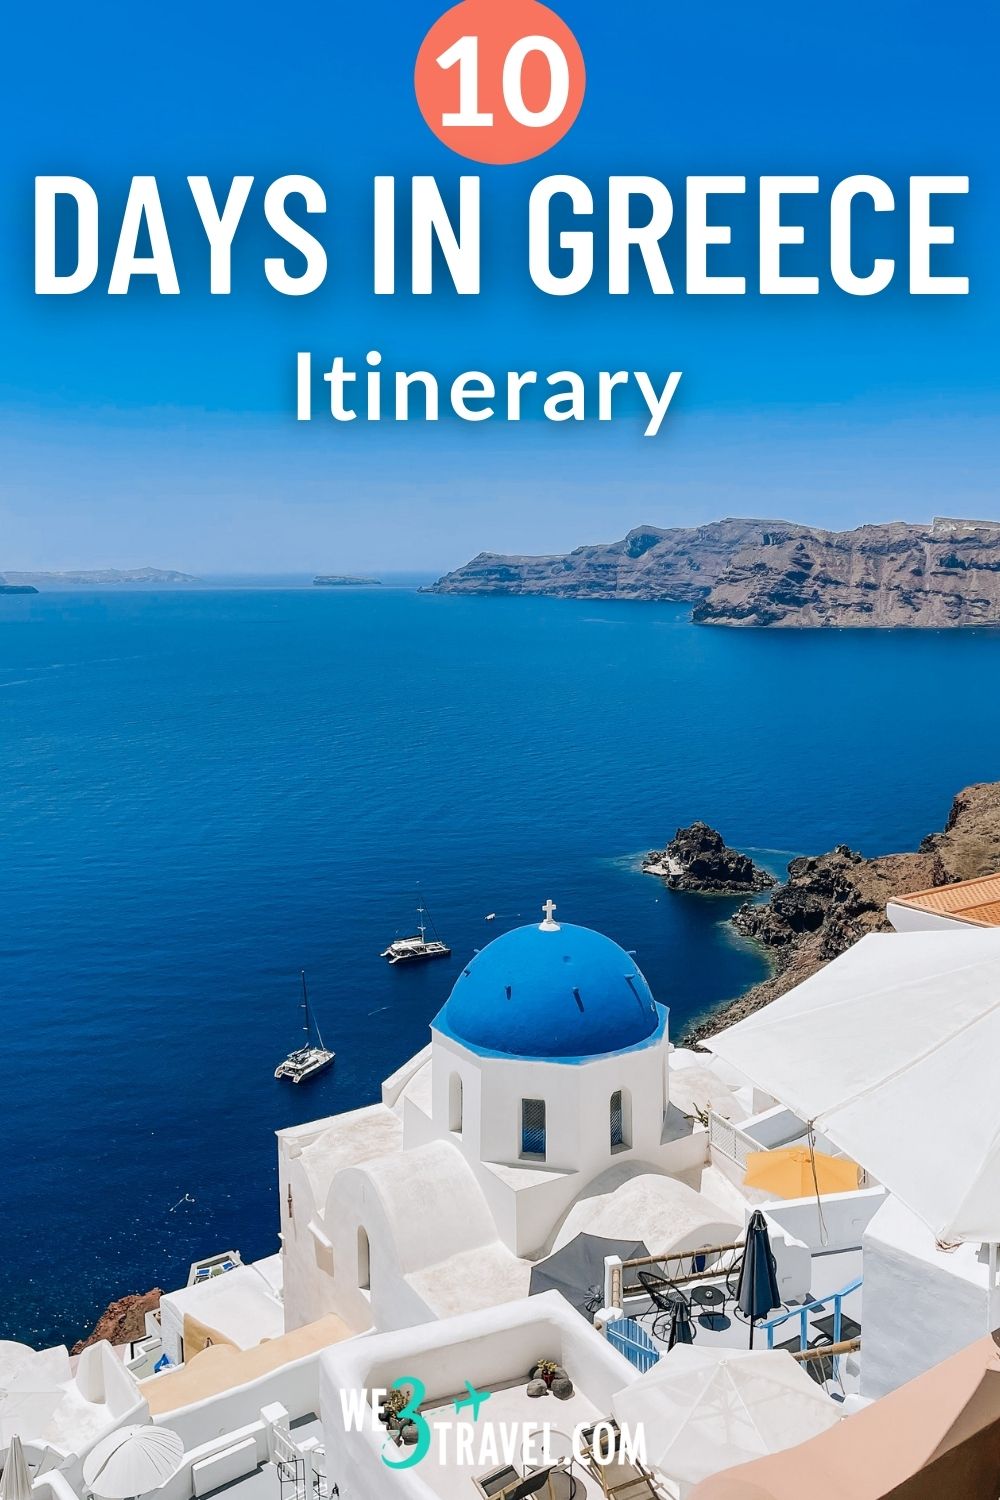 10 Days in Greece itinerary